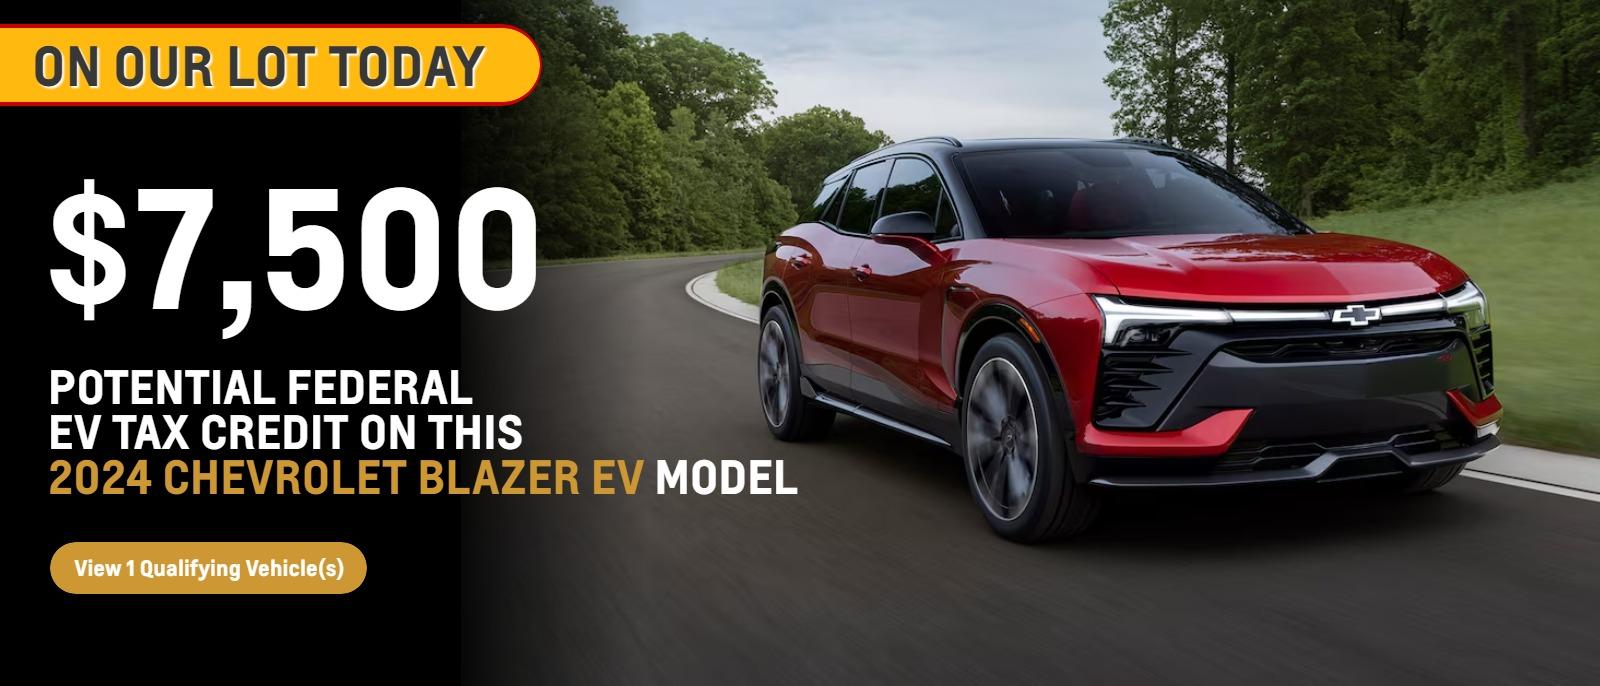 ON OUR LOT TODAY
$7,500 POTENTIAL FEDERAL EV TAX CREDIT ON THIS 2024 CHEVROLET BLAZER EV MODEL